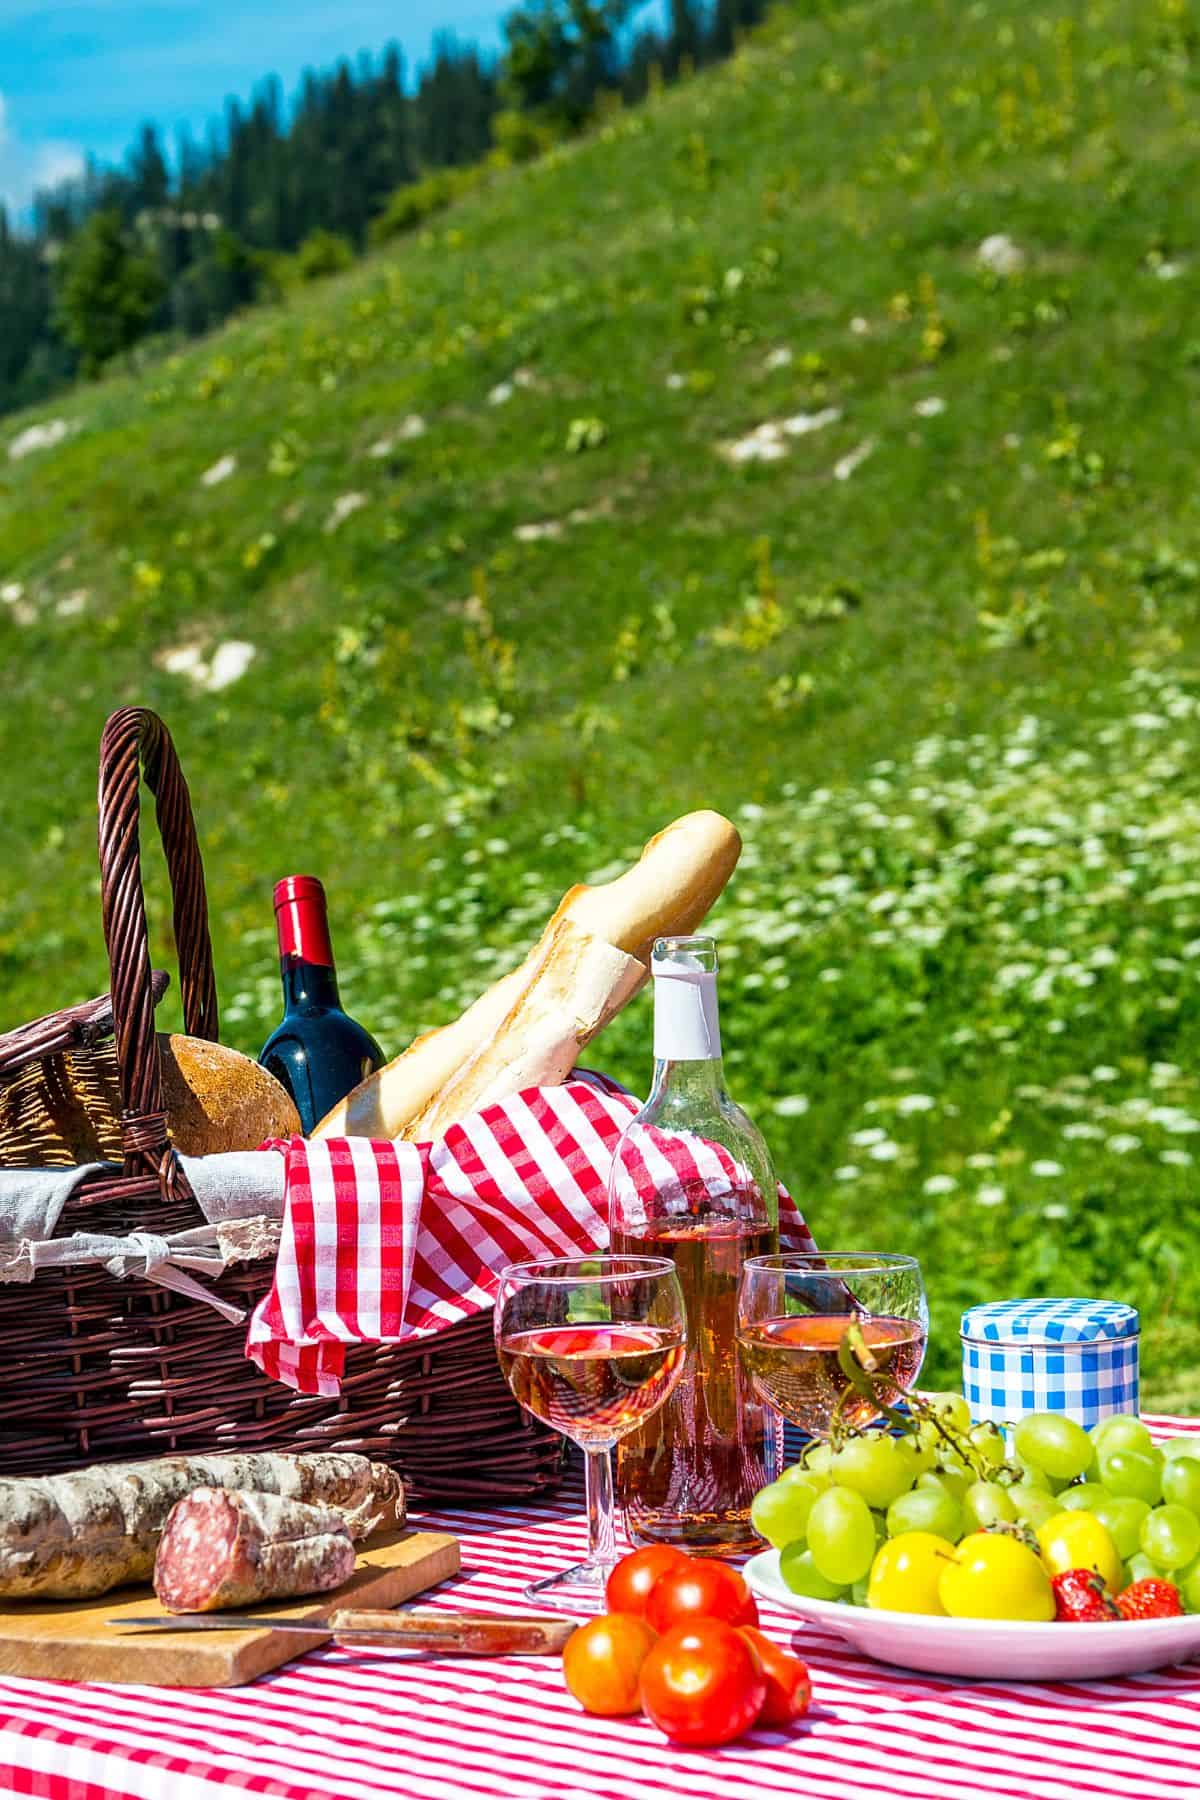 A picnic basket on the grass.